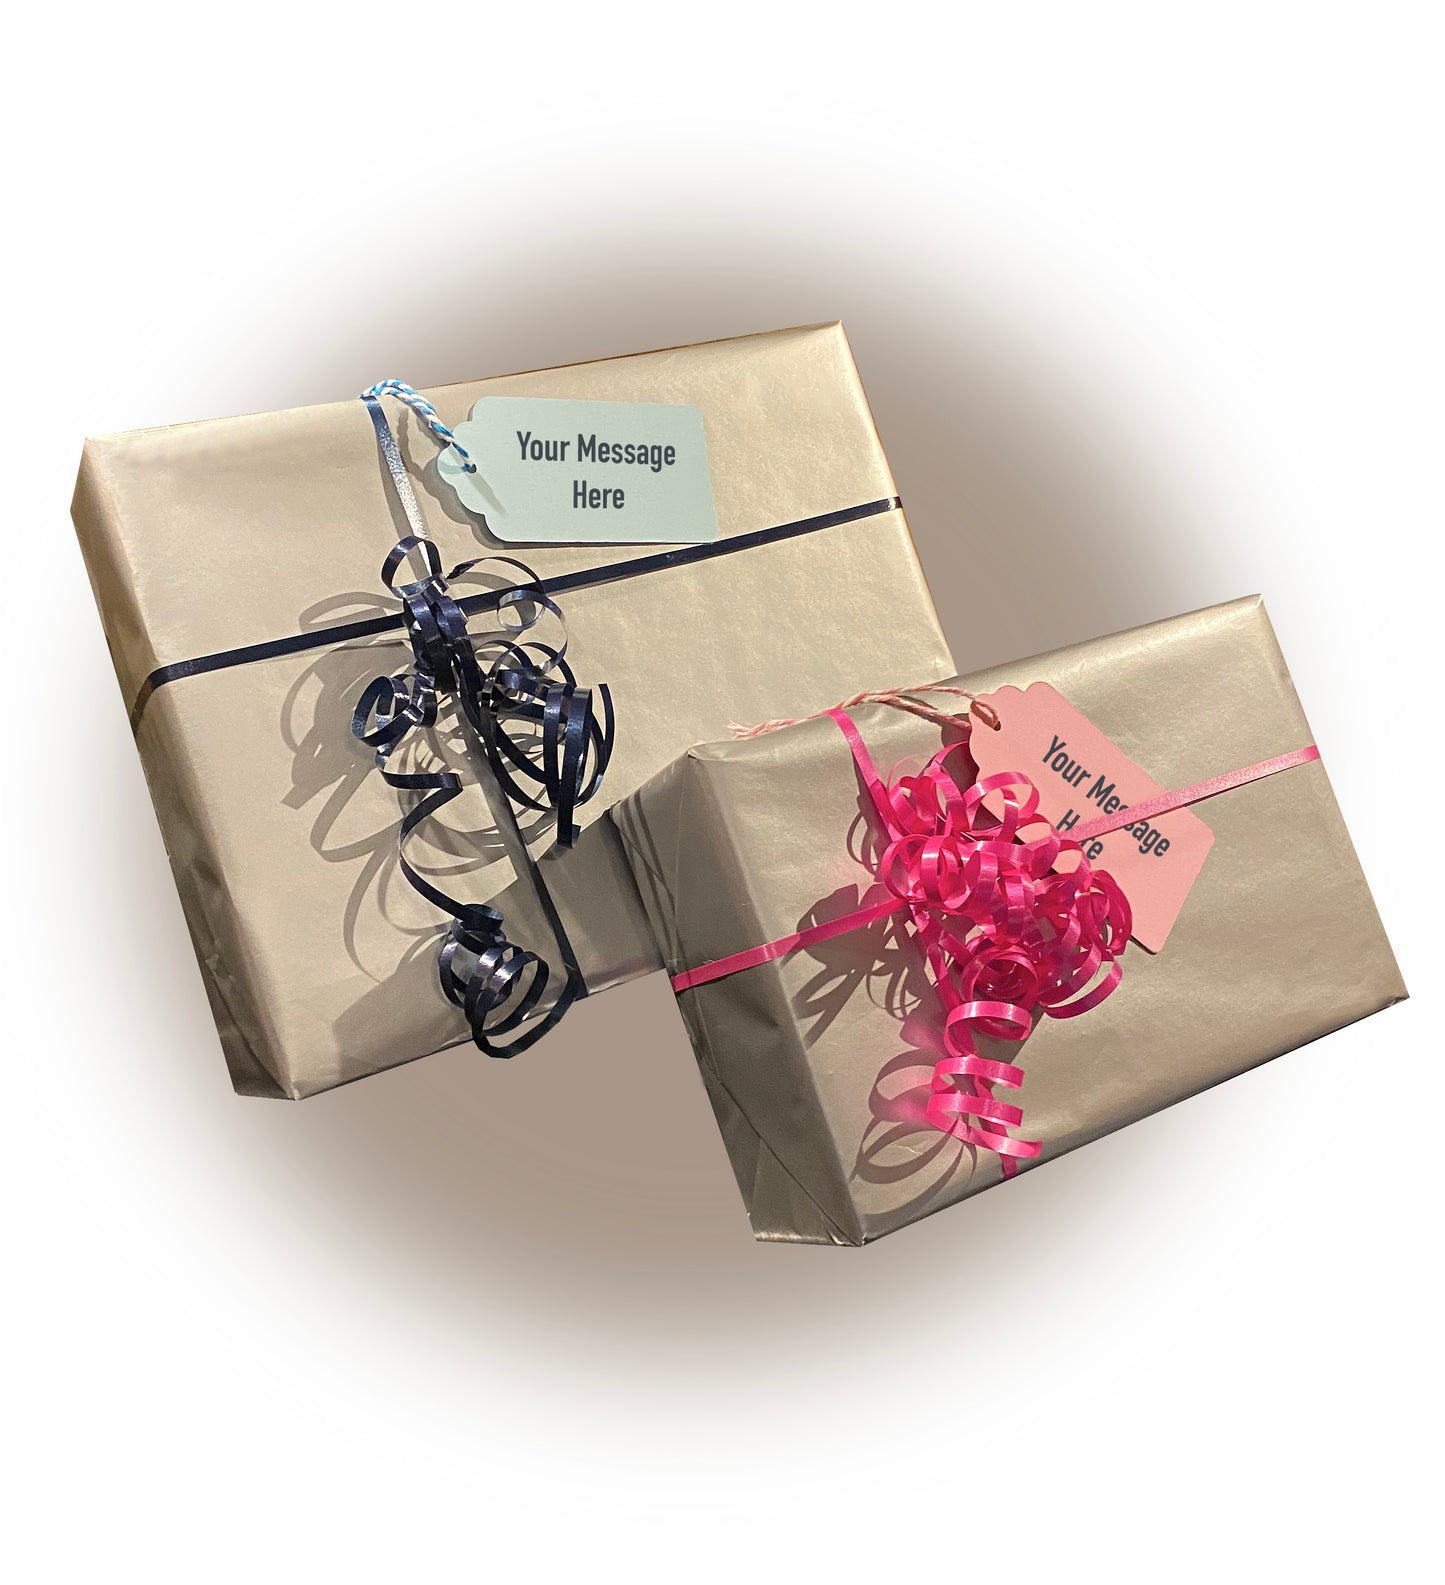 picture of Puppy trainer Variety Box gift wrapped